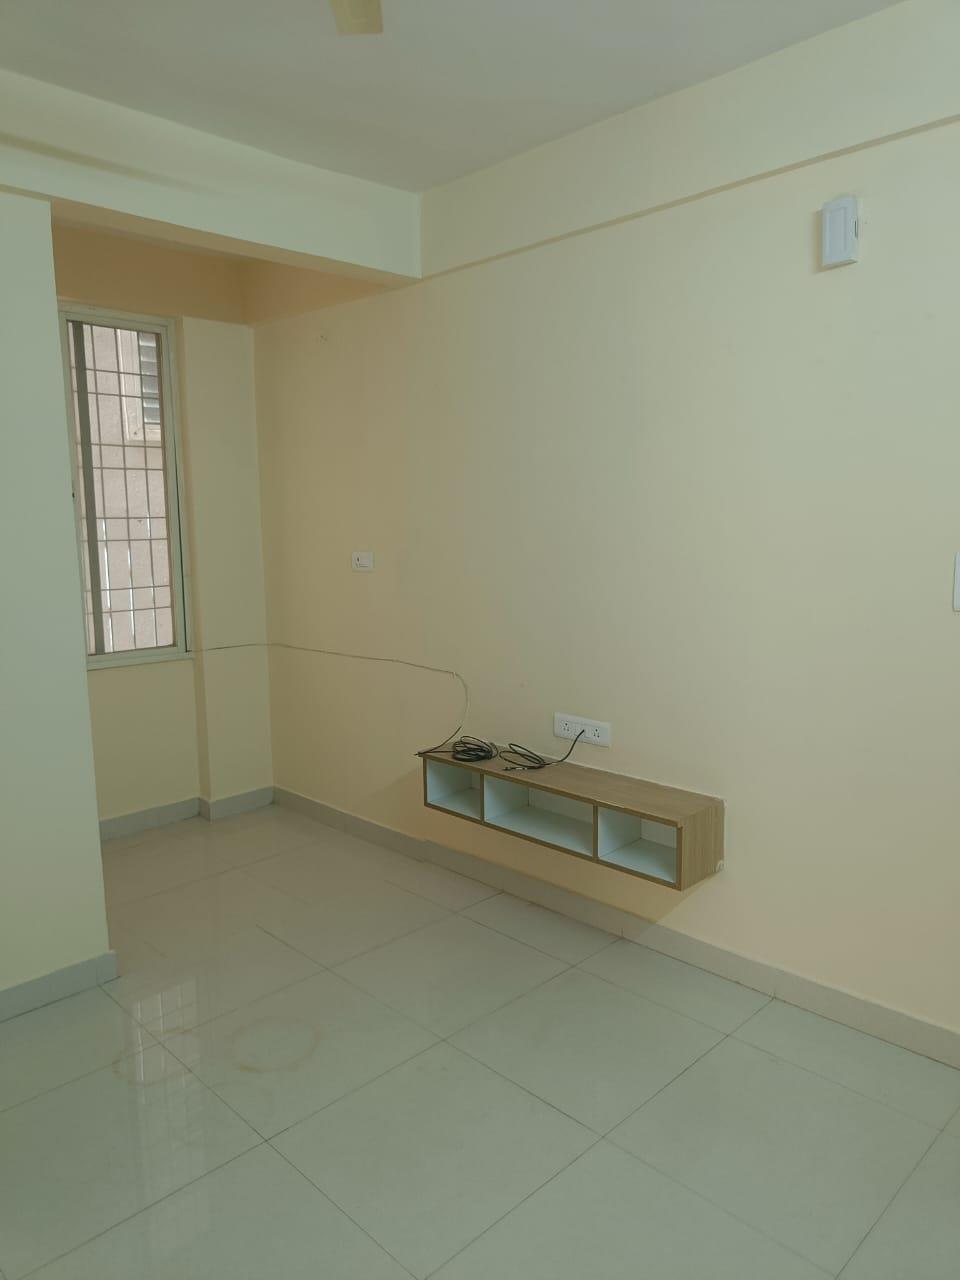 2 BHK Residential Apartment for Lease Only at 12 Lakhs - JAML2 - 27 in Kadugodi